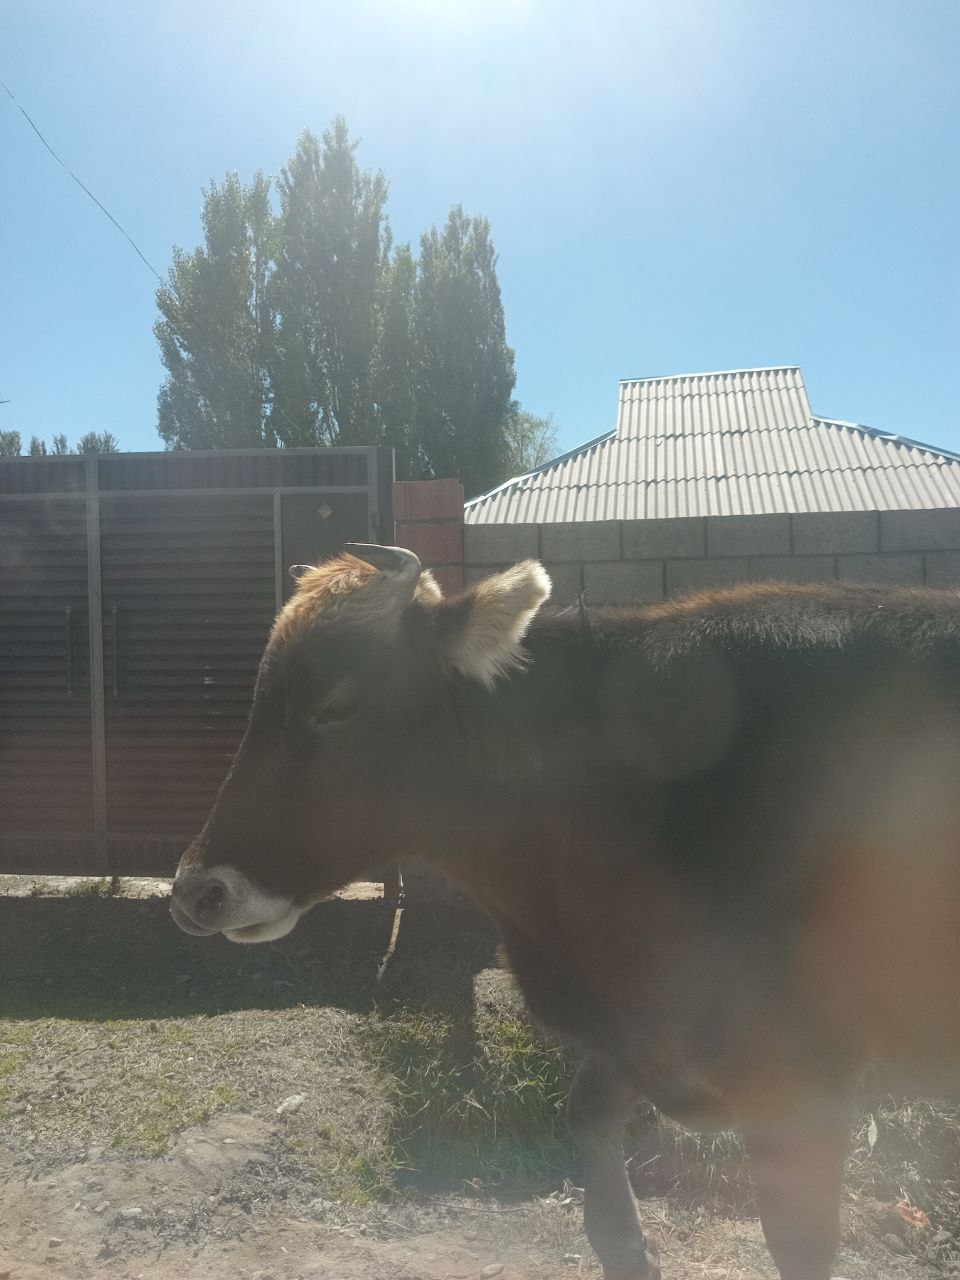 a brown cow walking, taken from maybe 2 feet away